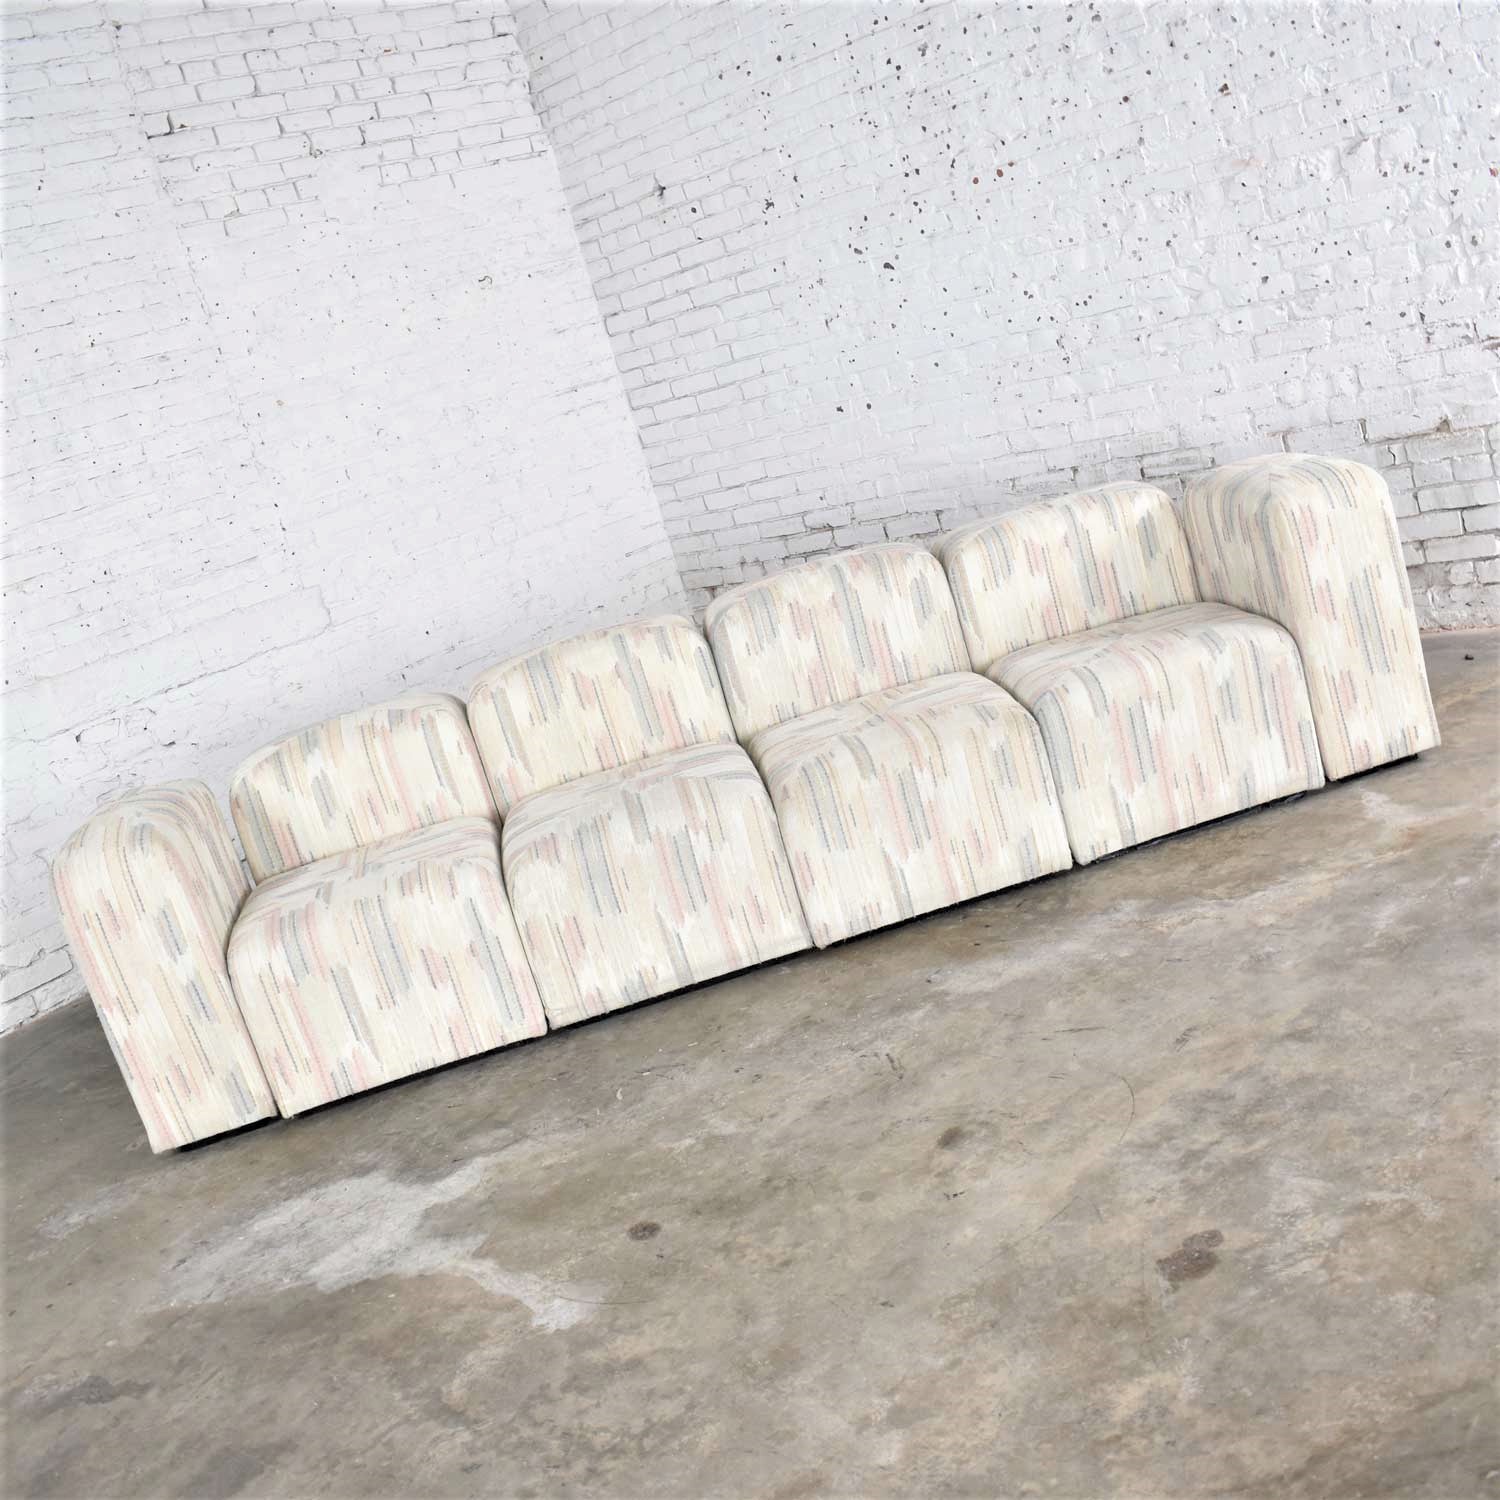 26 Modern Modular Back & Seating Sections for Sofas Chairs Ottomans Benches by Charlotte Chair Co.